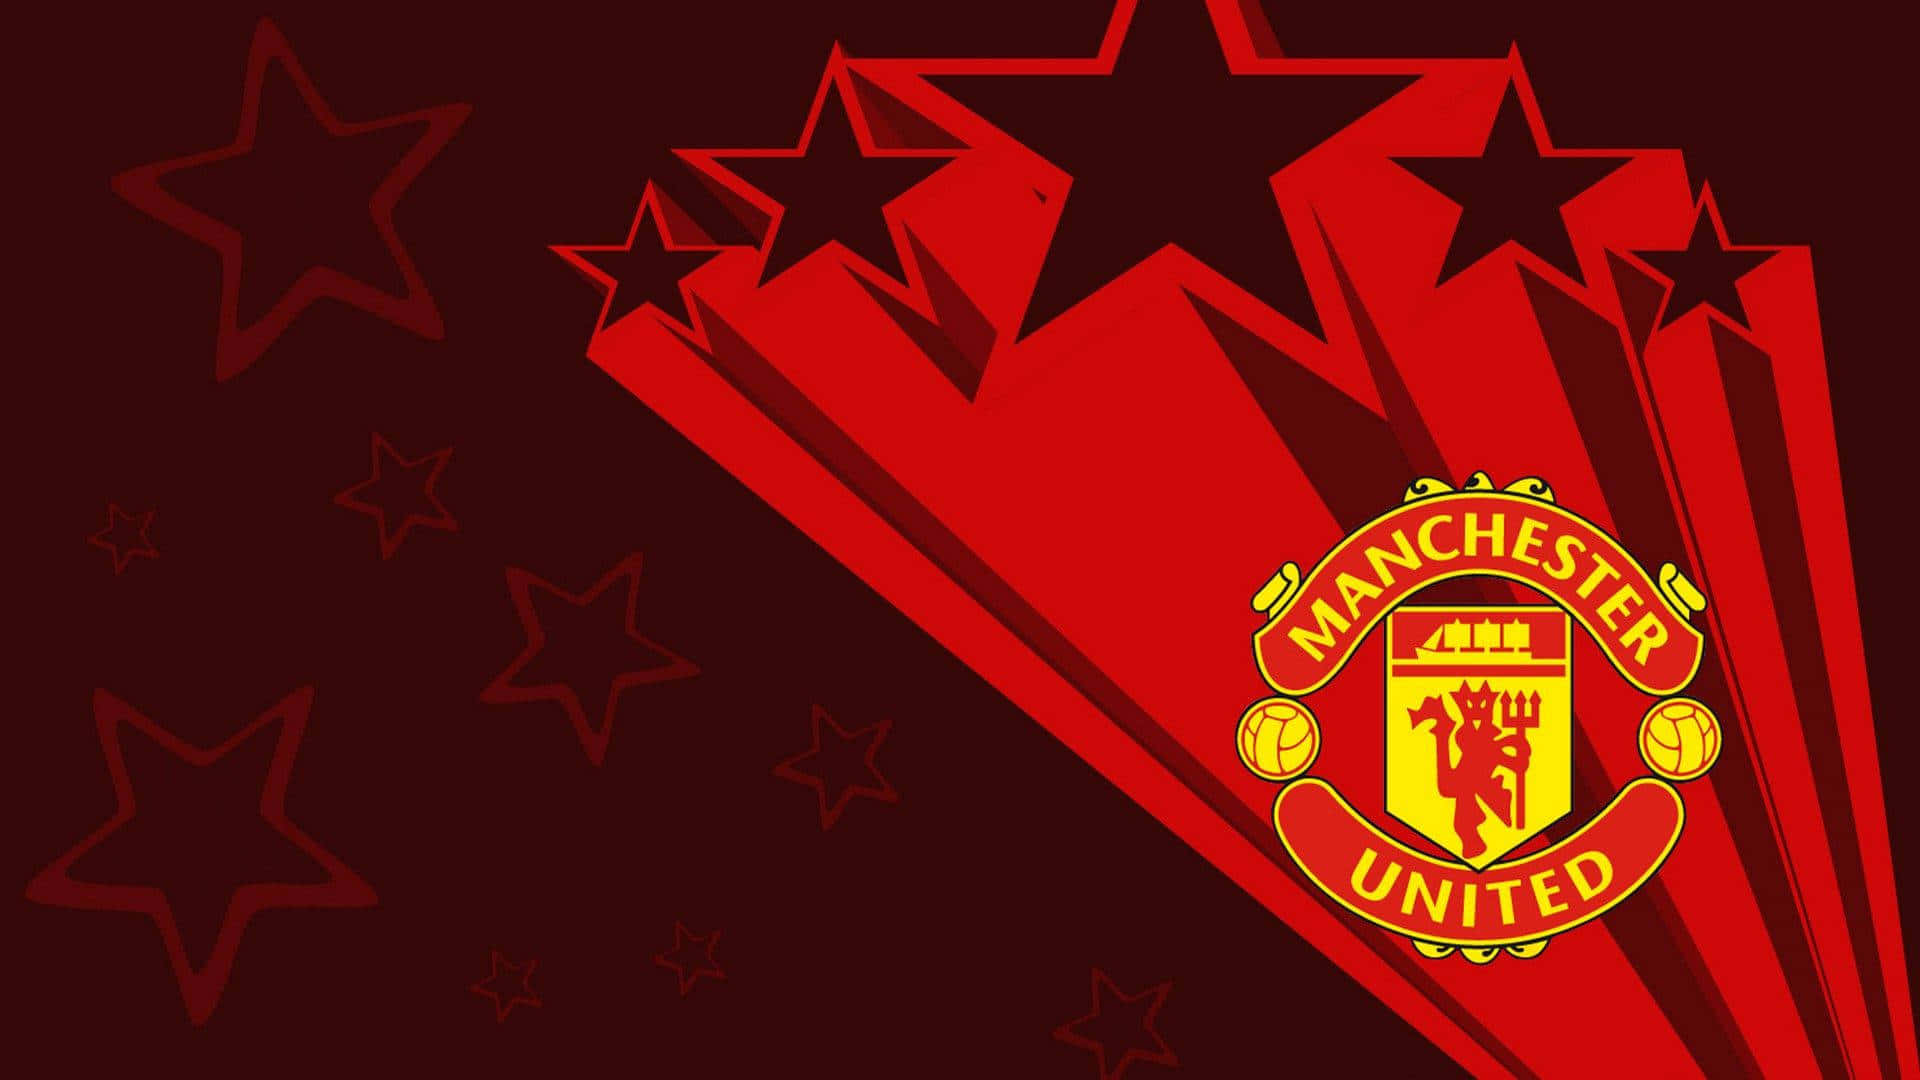 The Iconic Red and White of Manchester United